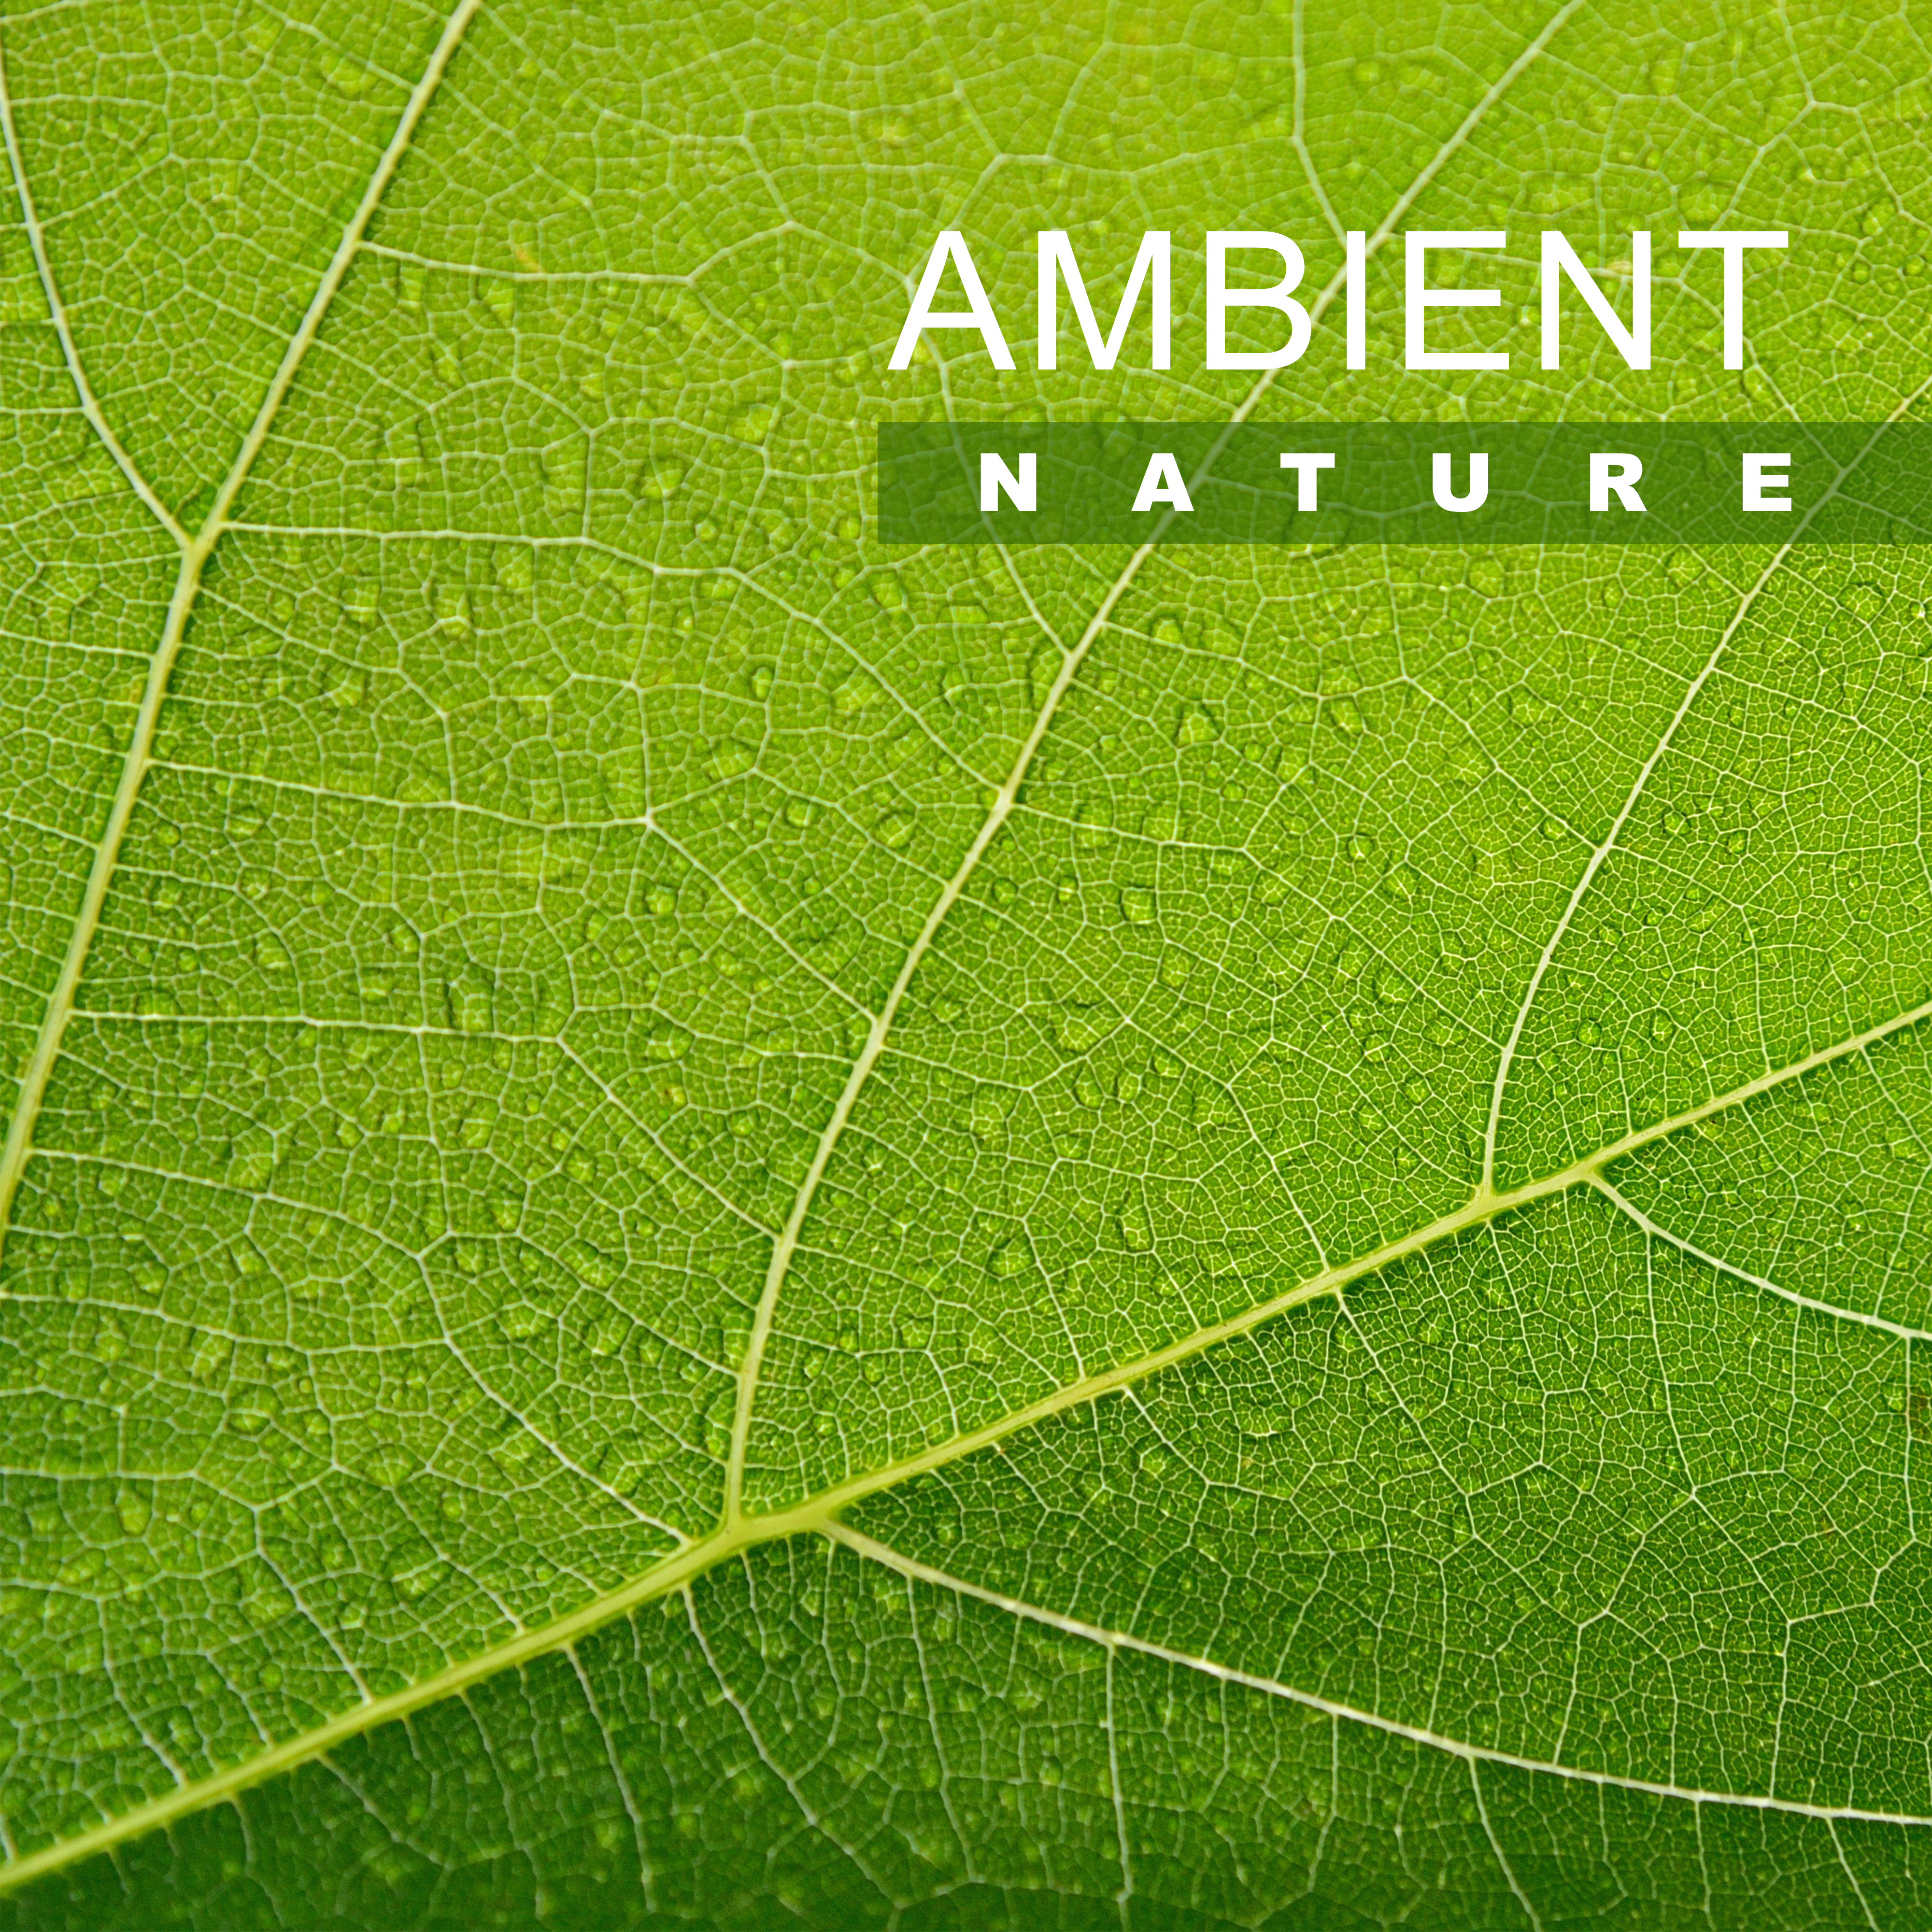 Ambient Nature  Calm Down with Soothing Sounds, Relaxing Waves, Rest Yourself